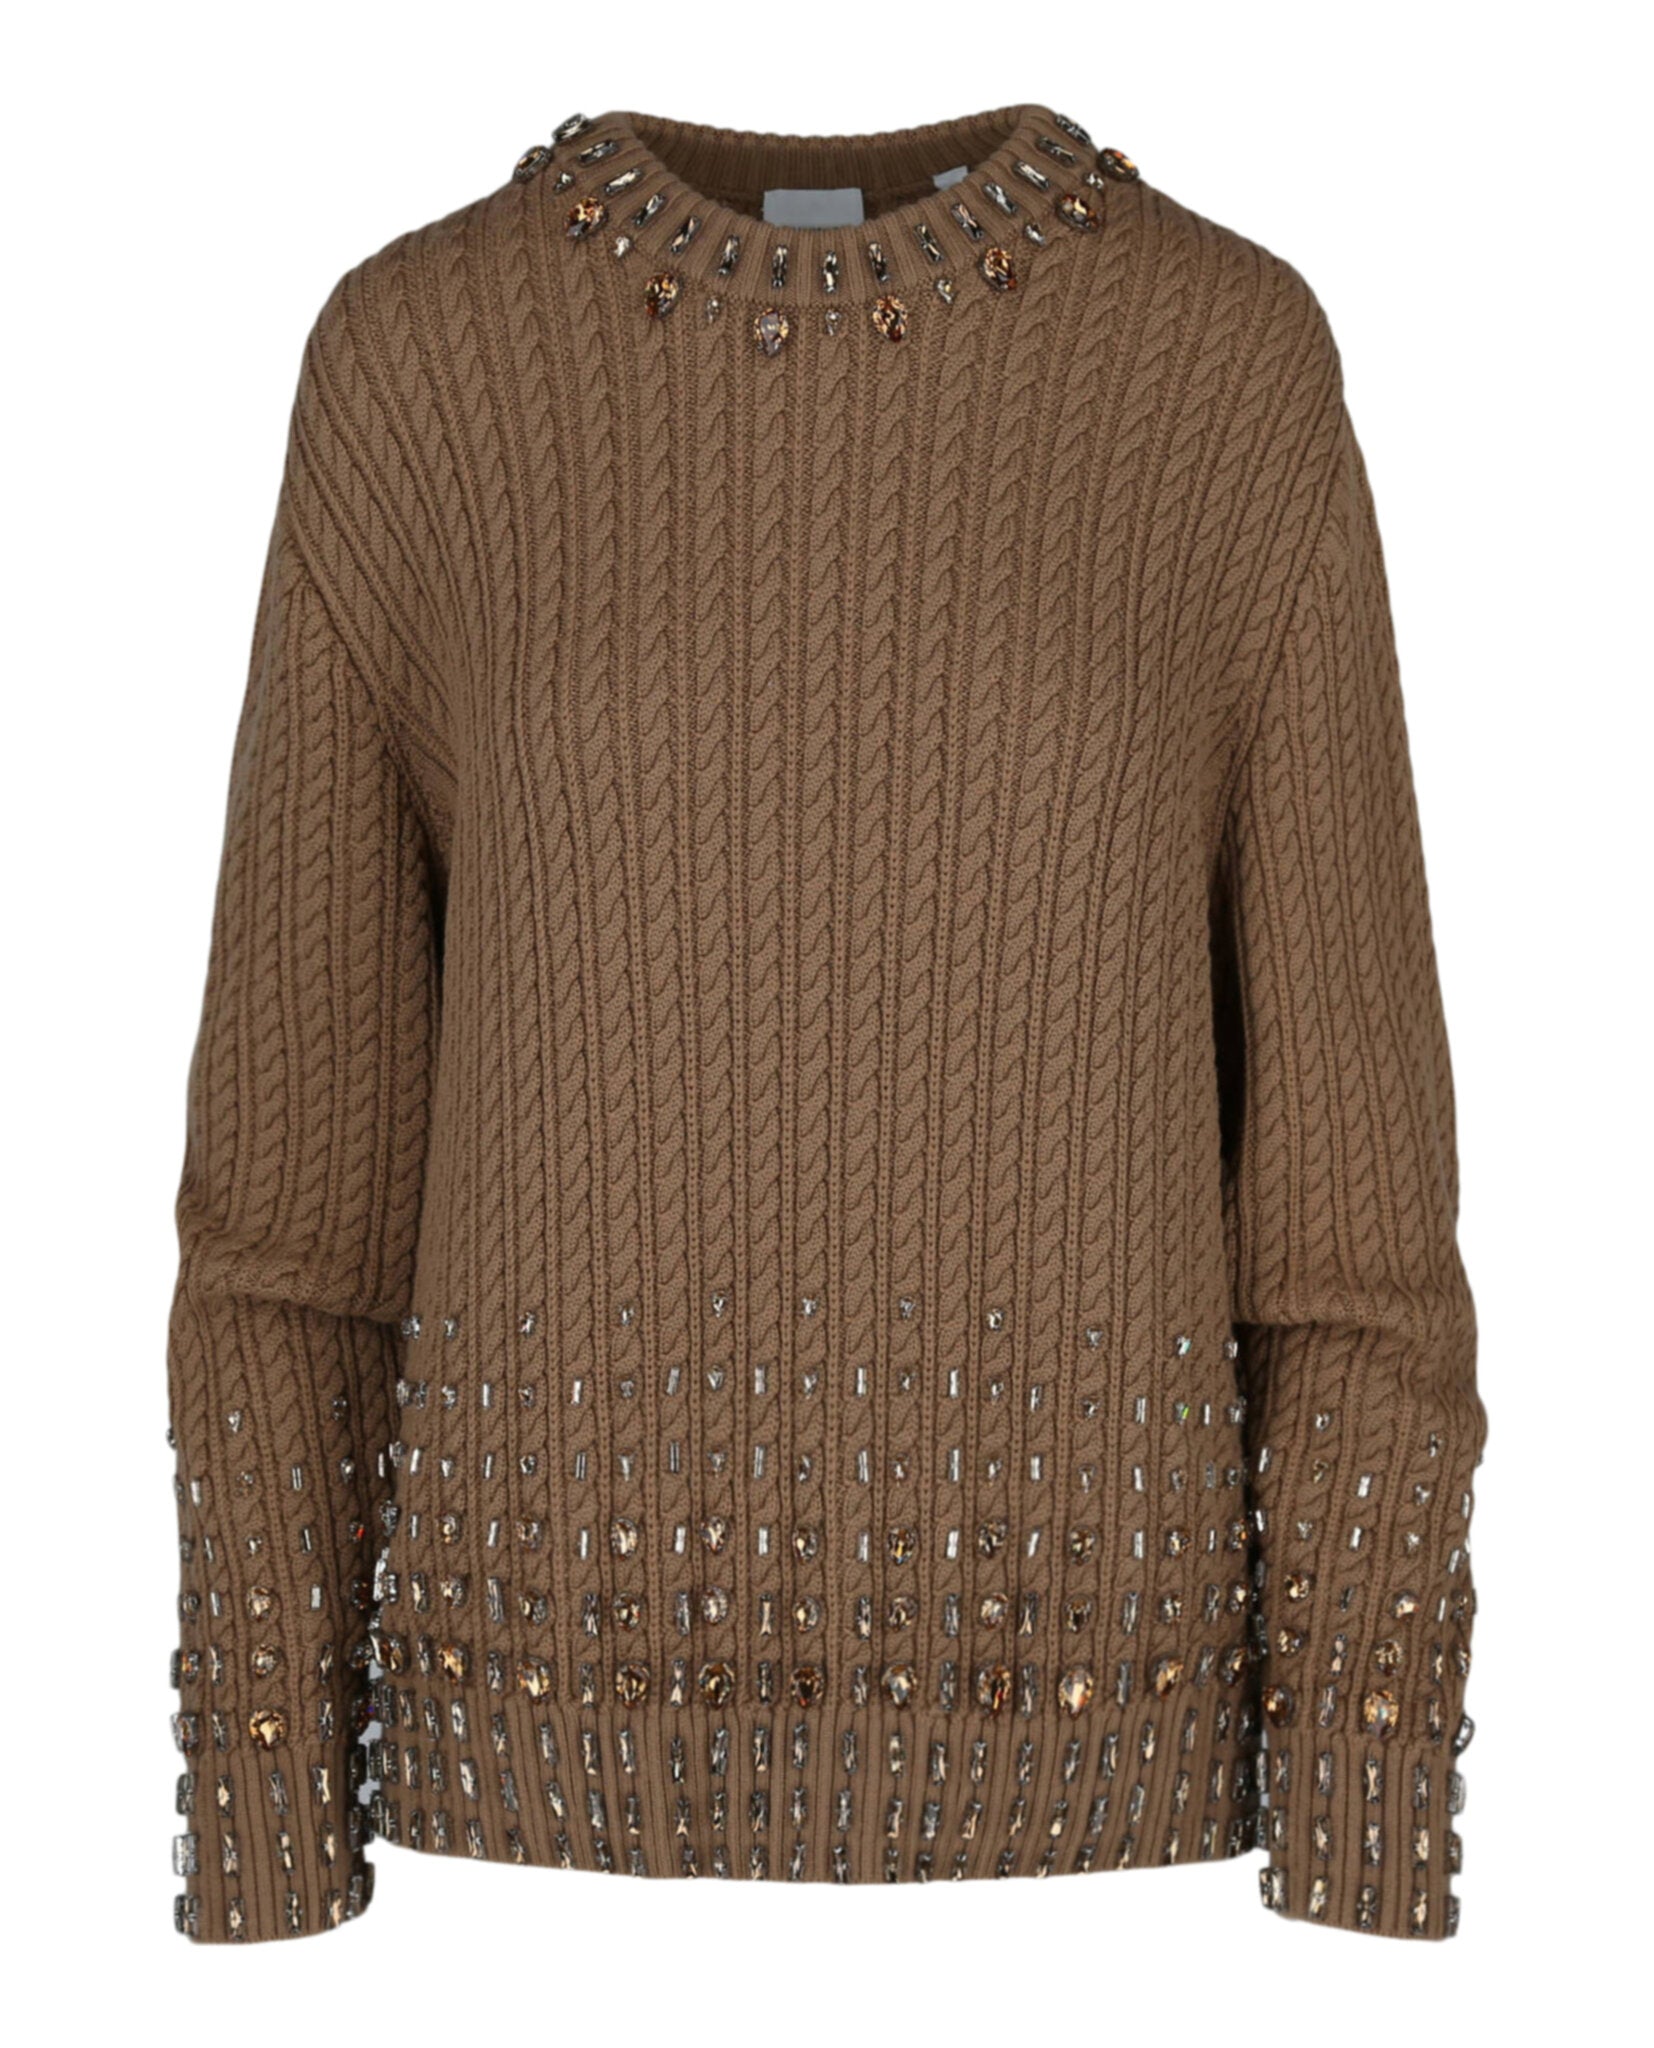 BURBERRY Crystal-Embellished Sweater